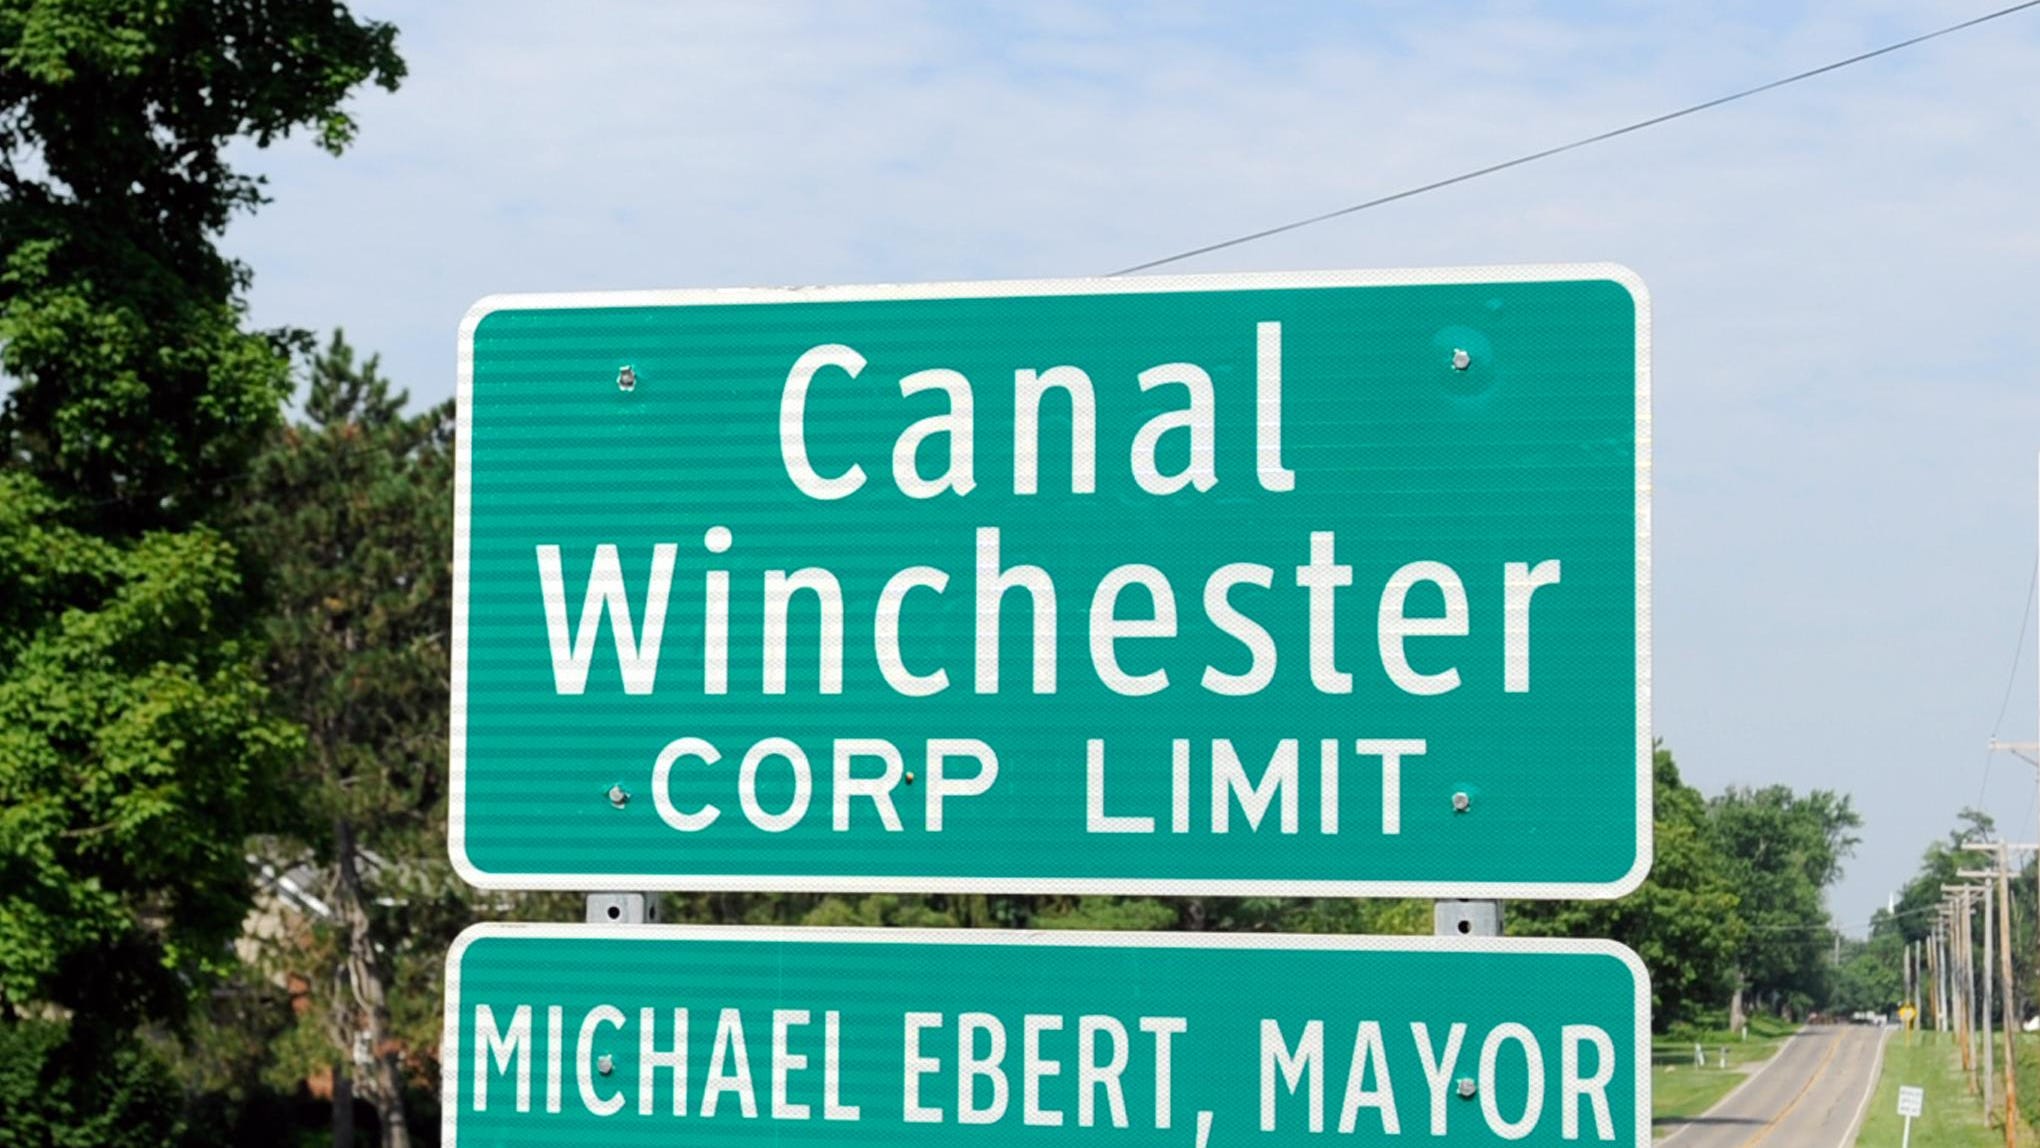  Blues & Ribfest in Canal Winchester this weekend, Carroll Festival upcoming 